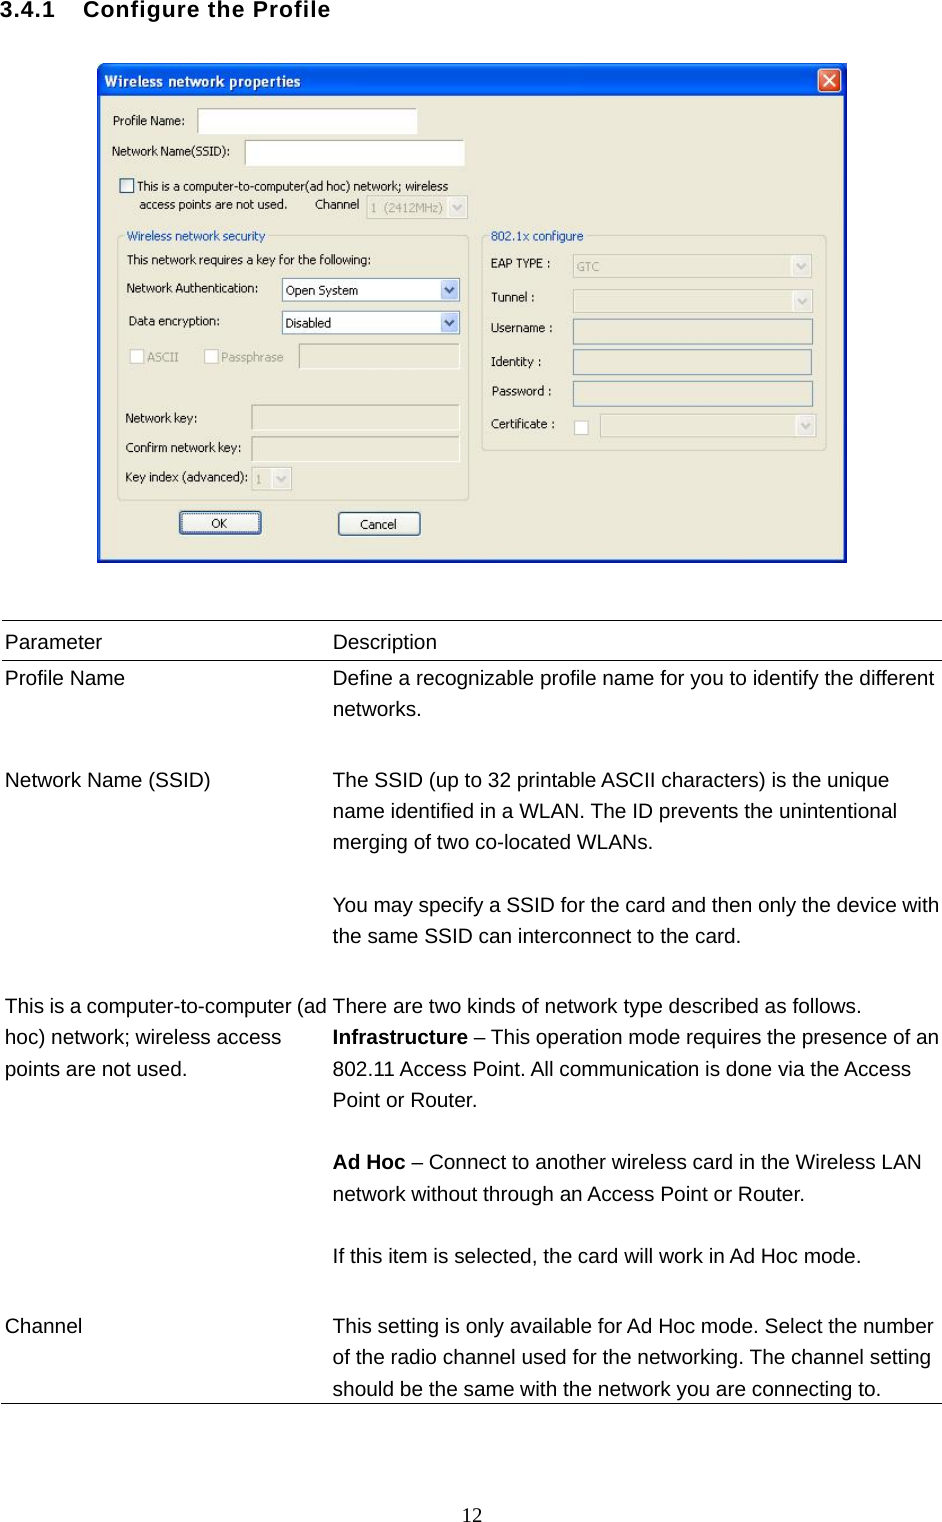  12 3.4.1    Configure the Profile     Parameter Description Profile Name  Define a recognizable profile name for you to identify the different networks.   Network Name (SSID)  The SSID (up to 32 printable ASCII characters) is the unique name identified in a WLAN. The ID prevents the unintentional merging of two co-located WLANs.    You may specify a SSID for the card and then only the device with the same SSID can interconnect to the card.   This is a computer-to-computer (ad hoc) network; wireless access points are not used. There are two kinds of network type described as follows. Infrastructure – This operation mode requires the presence of an 802.11 Access Point. All communication is done via the Access Point or Router.    Ad Hoc – Connect to another wireless card in the Wireless LAN network without through an Access Point or Router.  If this item is selected, the card will work in Ad Hoc mode.   Channel  This setting is only available for Ad Hoc mode. Select the number of the radio channel used for the networking. The channel setting should be the same with the network you are connecting to.   